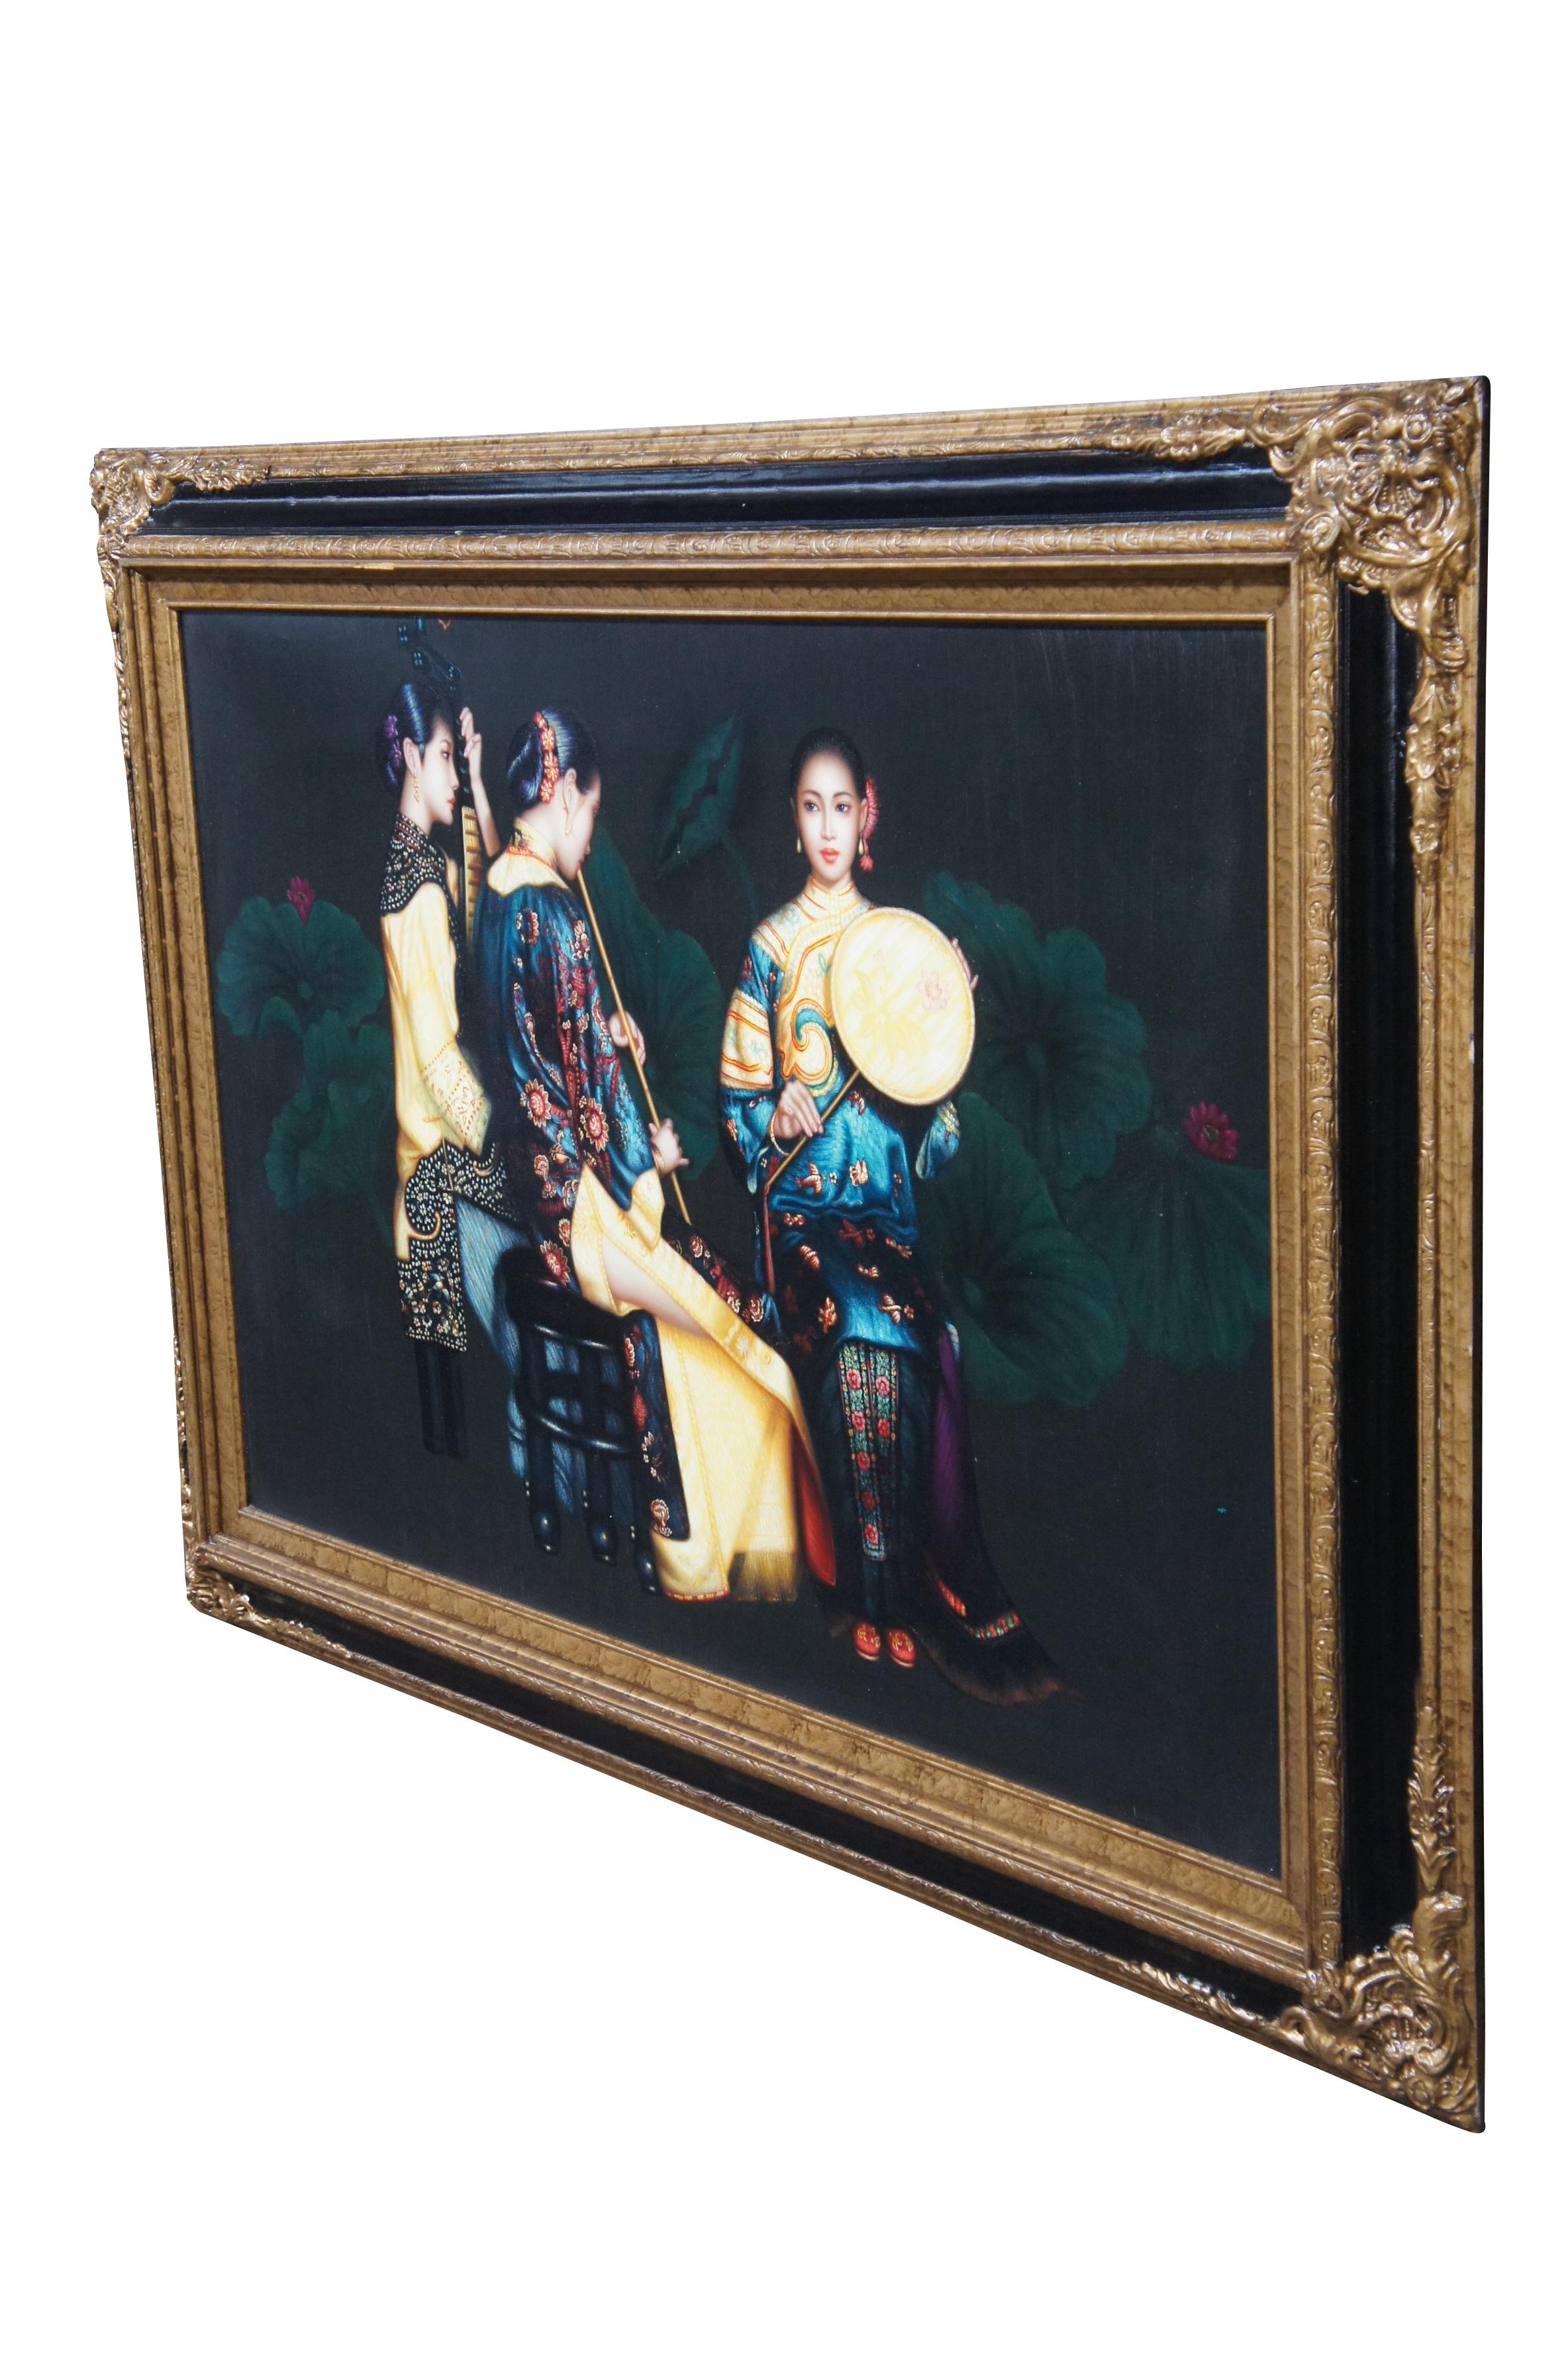 Vintage trio of Chinese woman playing instruments oil painting on canvas after Chen Yifei.  Features three young musicians in traditional court attire playing various instruments.

Chen Yifei (Chinese: 陈逸飞; April 12, 1946 – April 10, 2005) was a